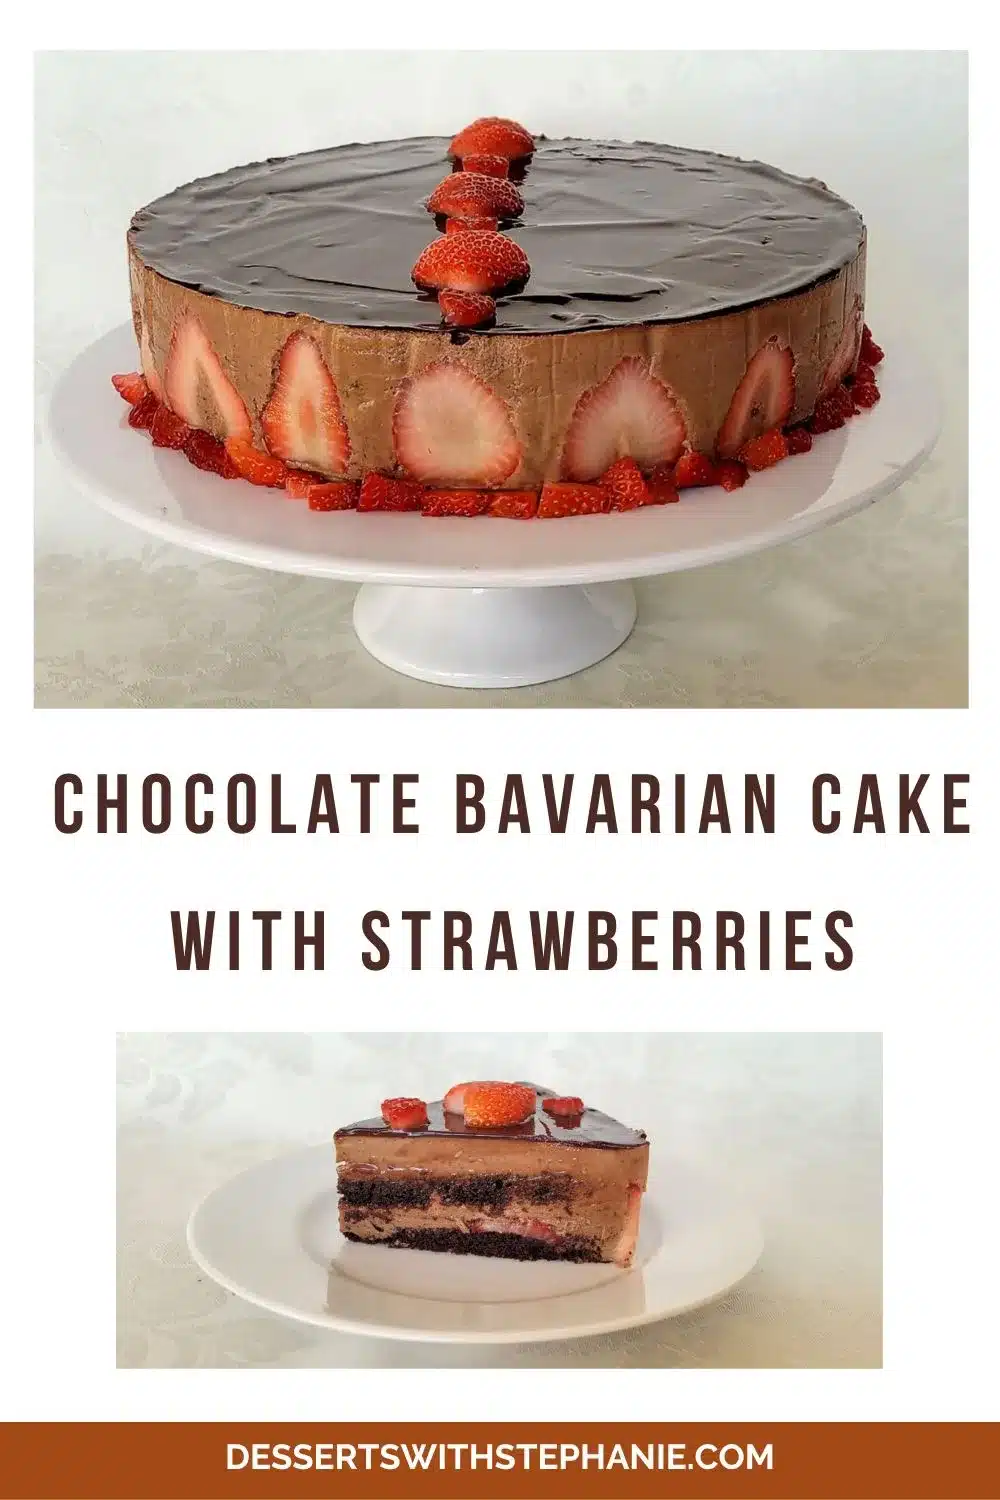 Pinterest card for chocolate Bavarian cream cake with strawberries